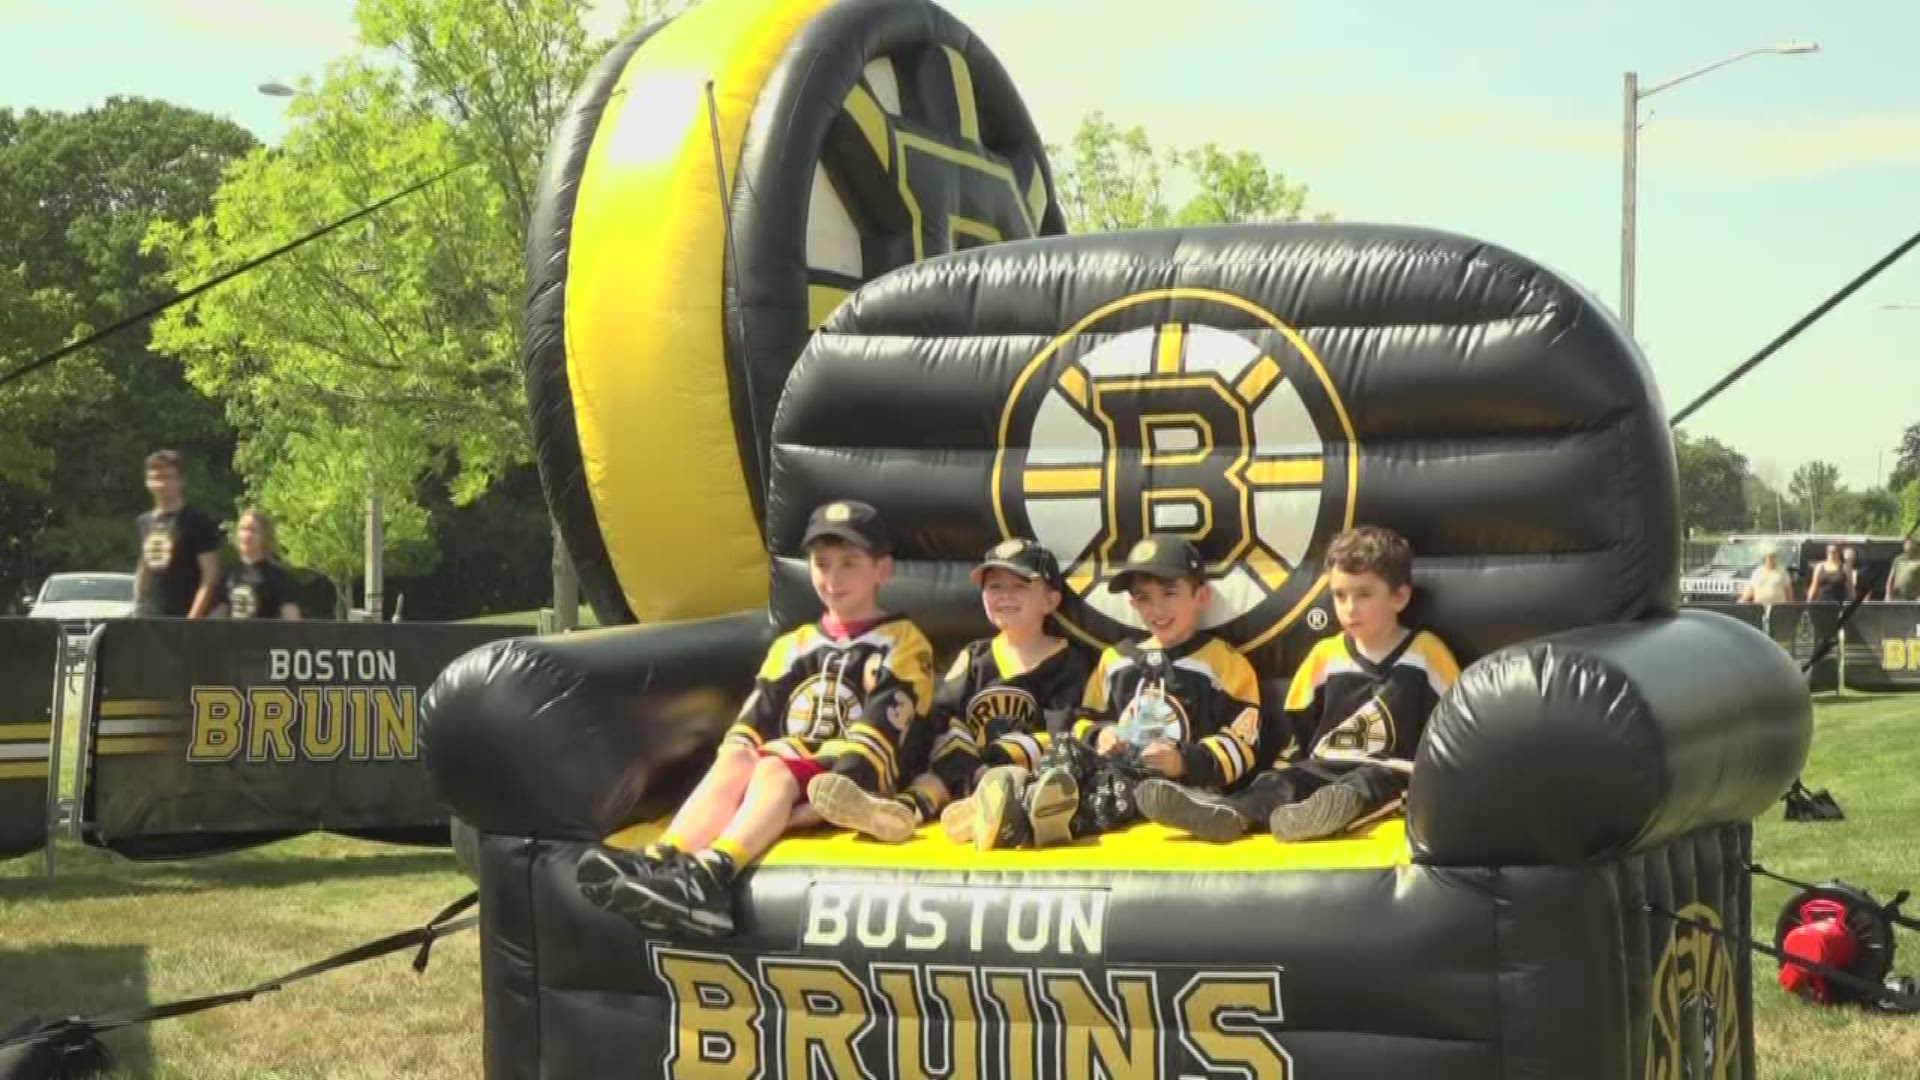 Hundreds of people came to Bruins Fan Fest on Friday, August 16 in Portland to meet players and coaches and play games.